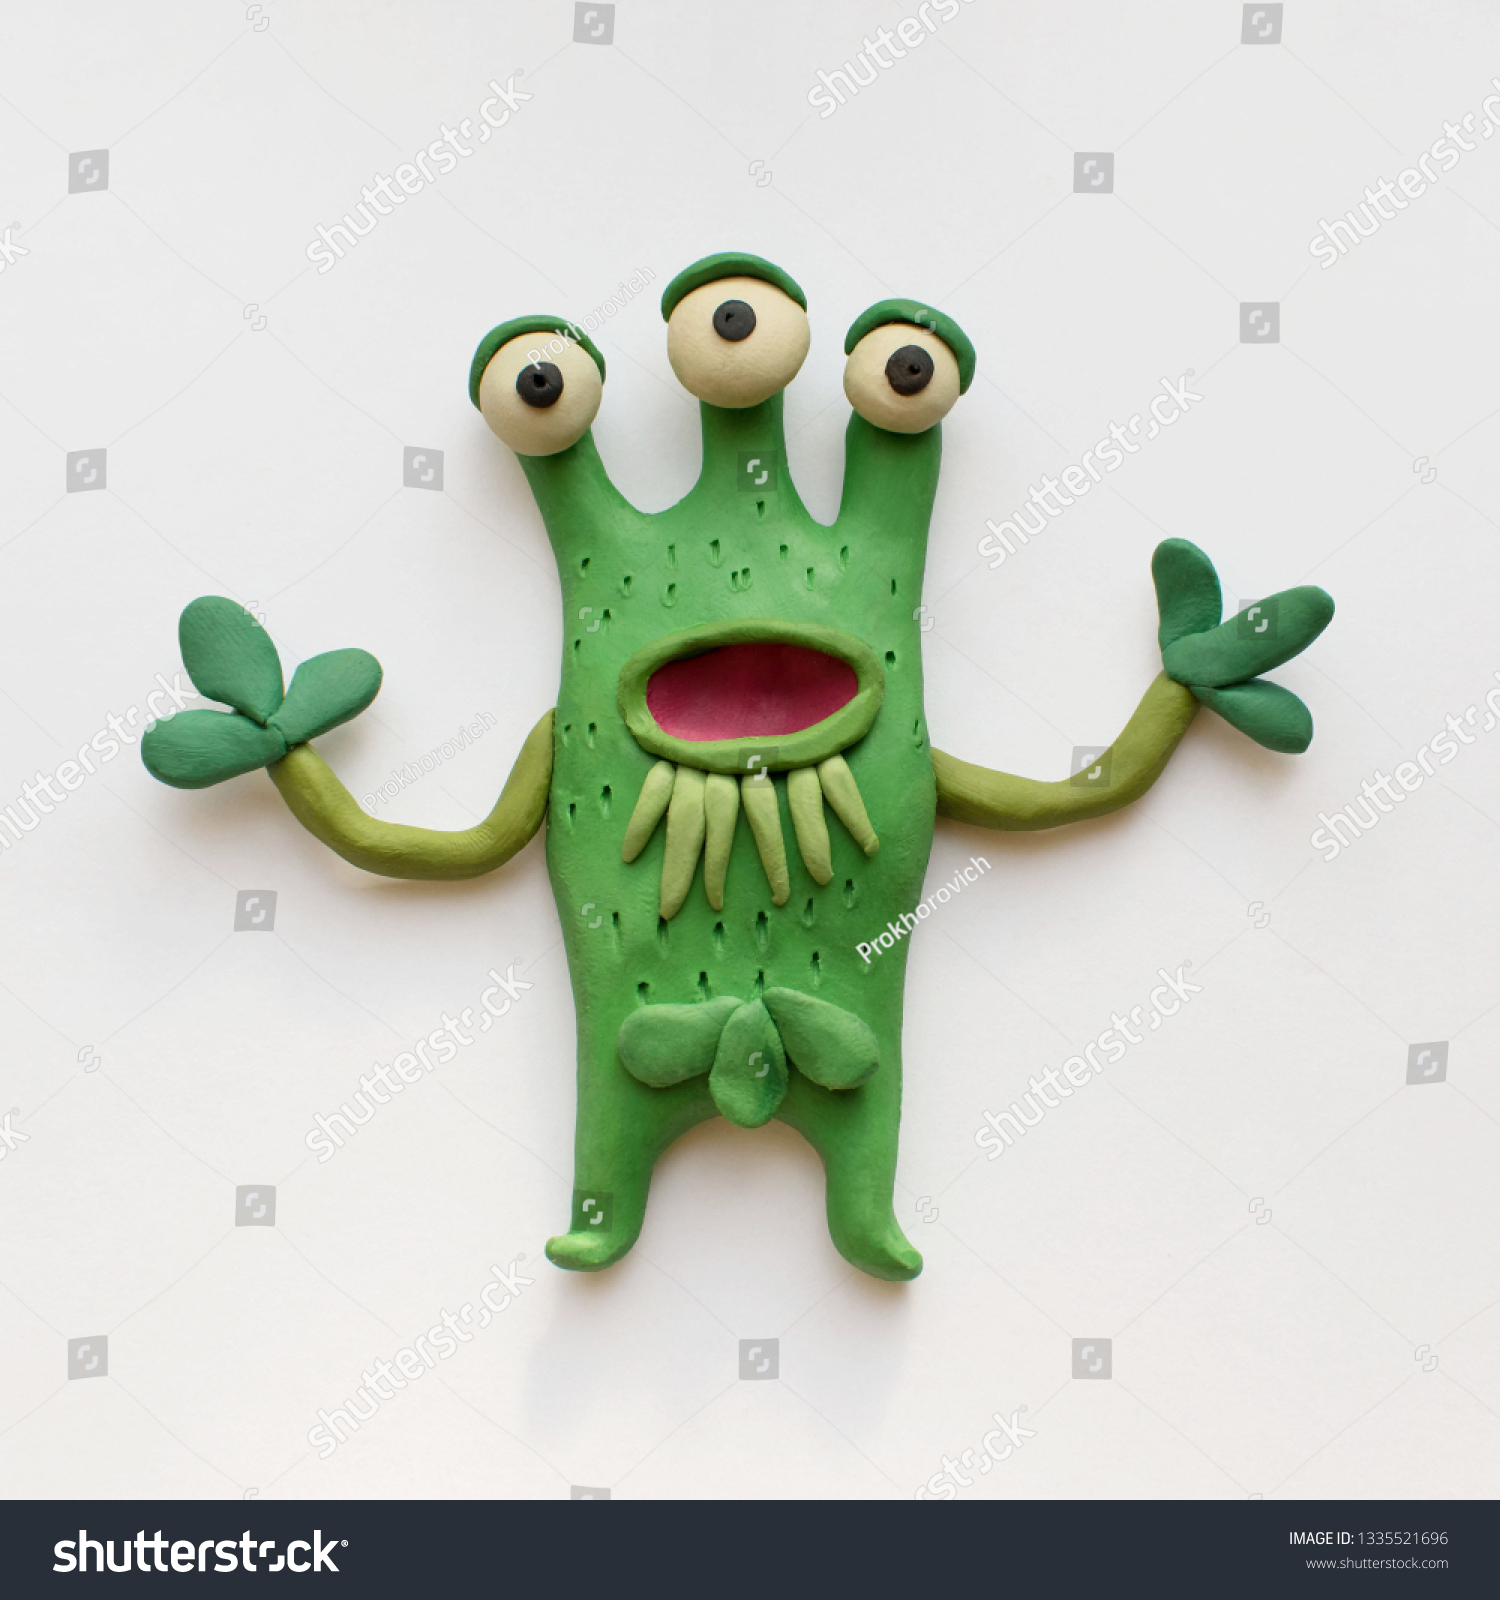 Funny three-eyed monster plant. Plasticine character on a white background #1335521696